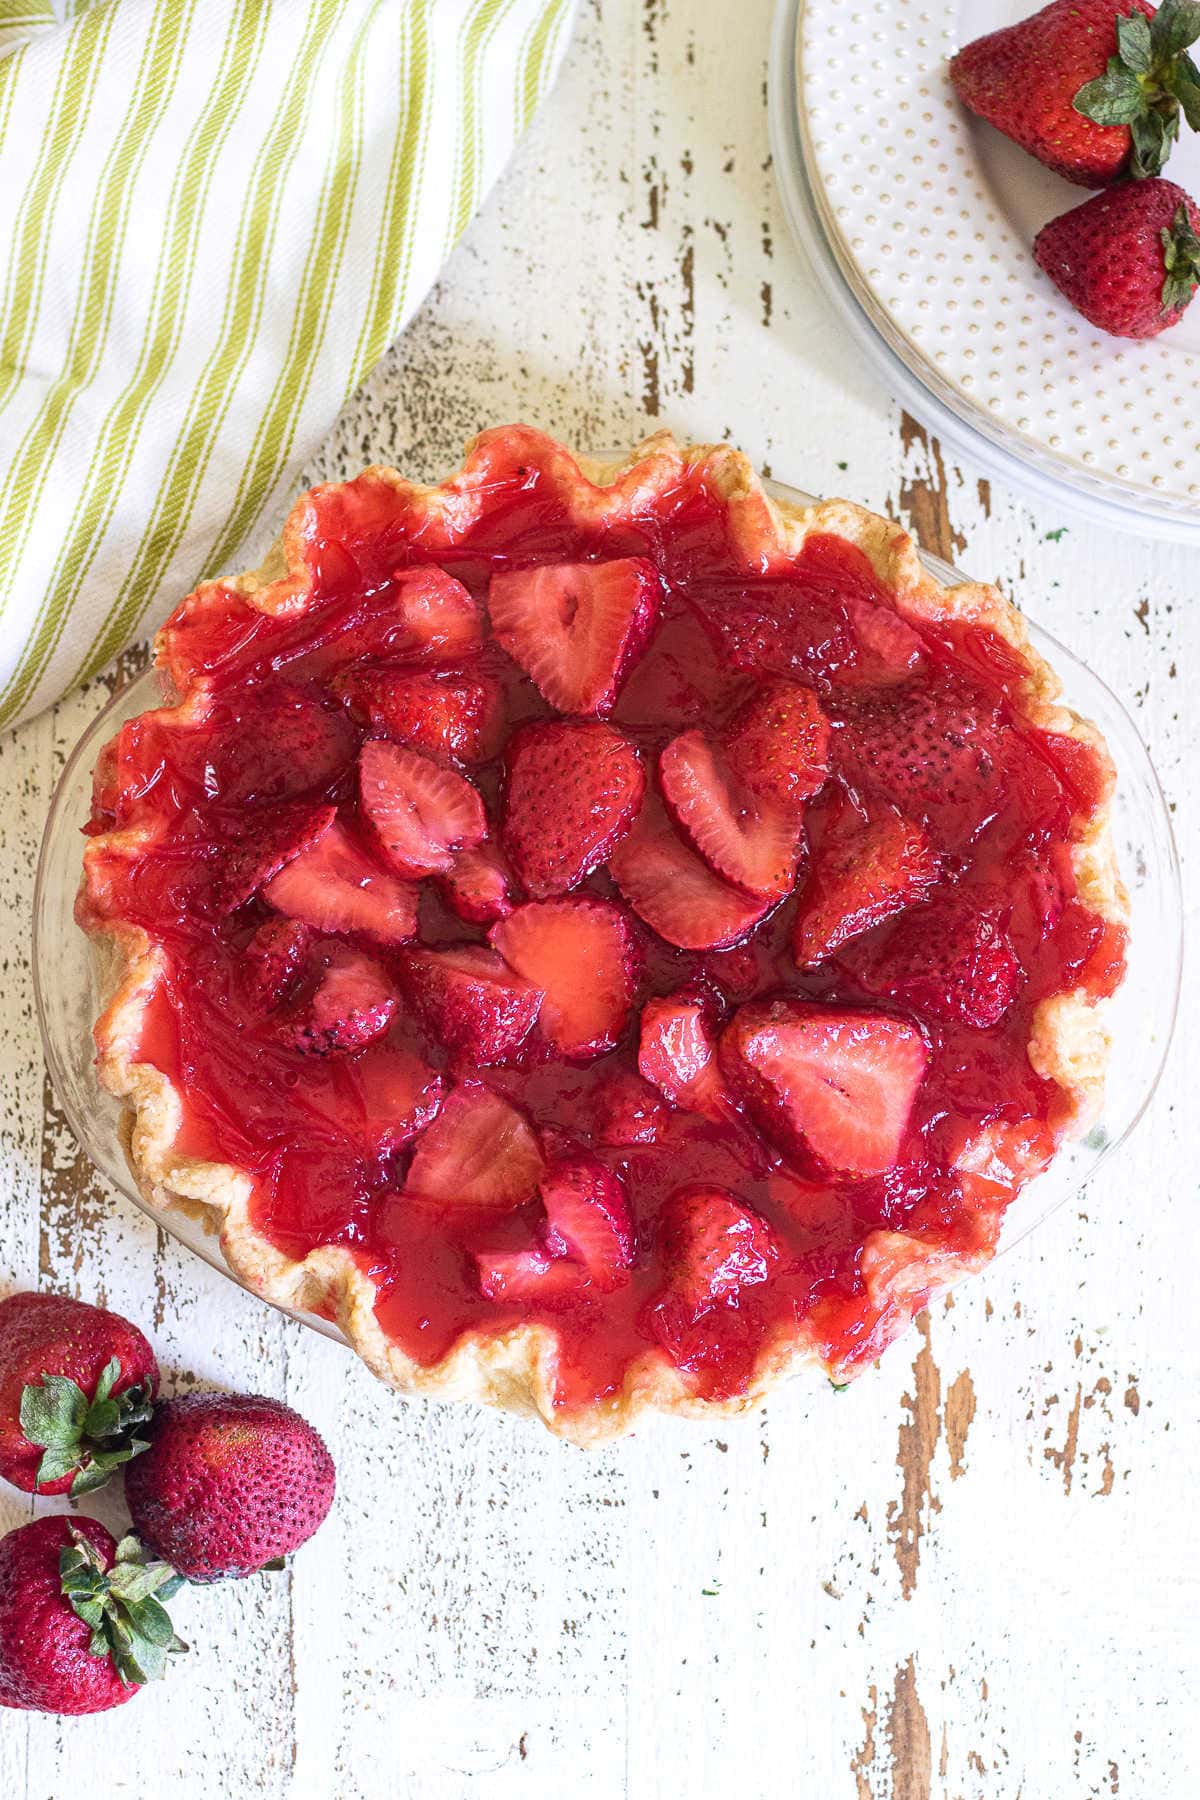 Overhead view of a strawberry pie.